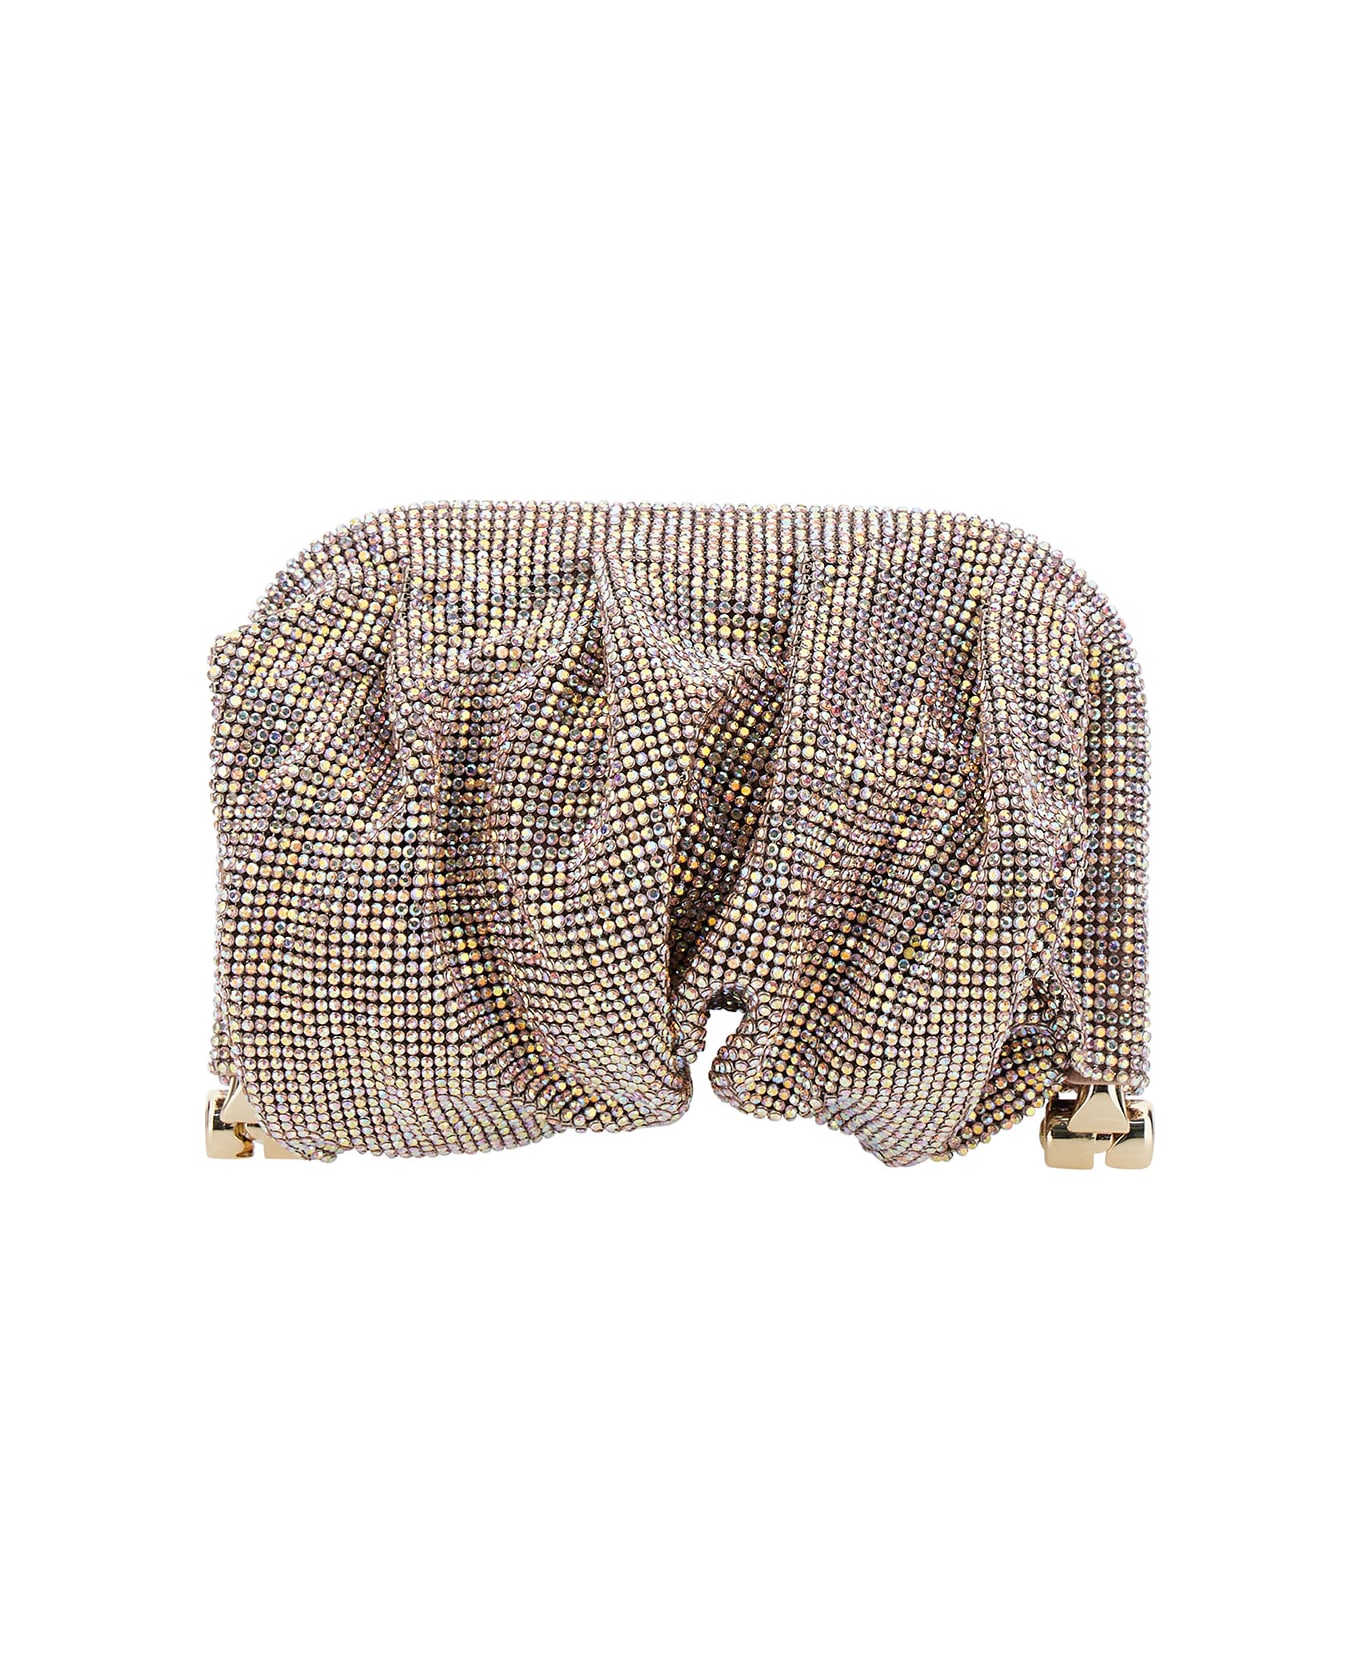 Benedetta Bruzziches 'venus La Petite' Pink Clutch Bag In Fabric With Allover Crystals Woman - Pink